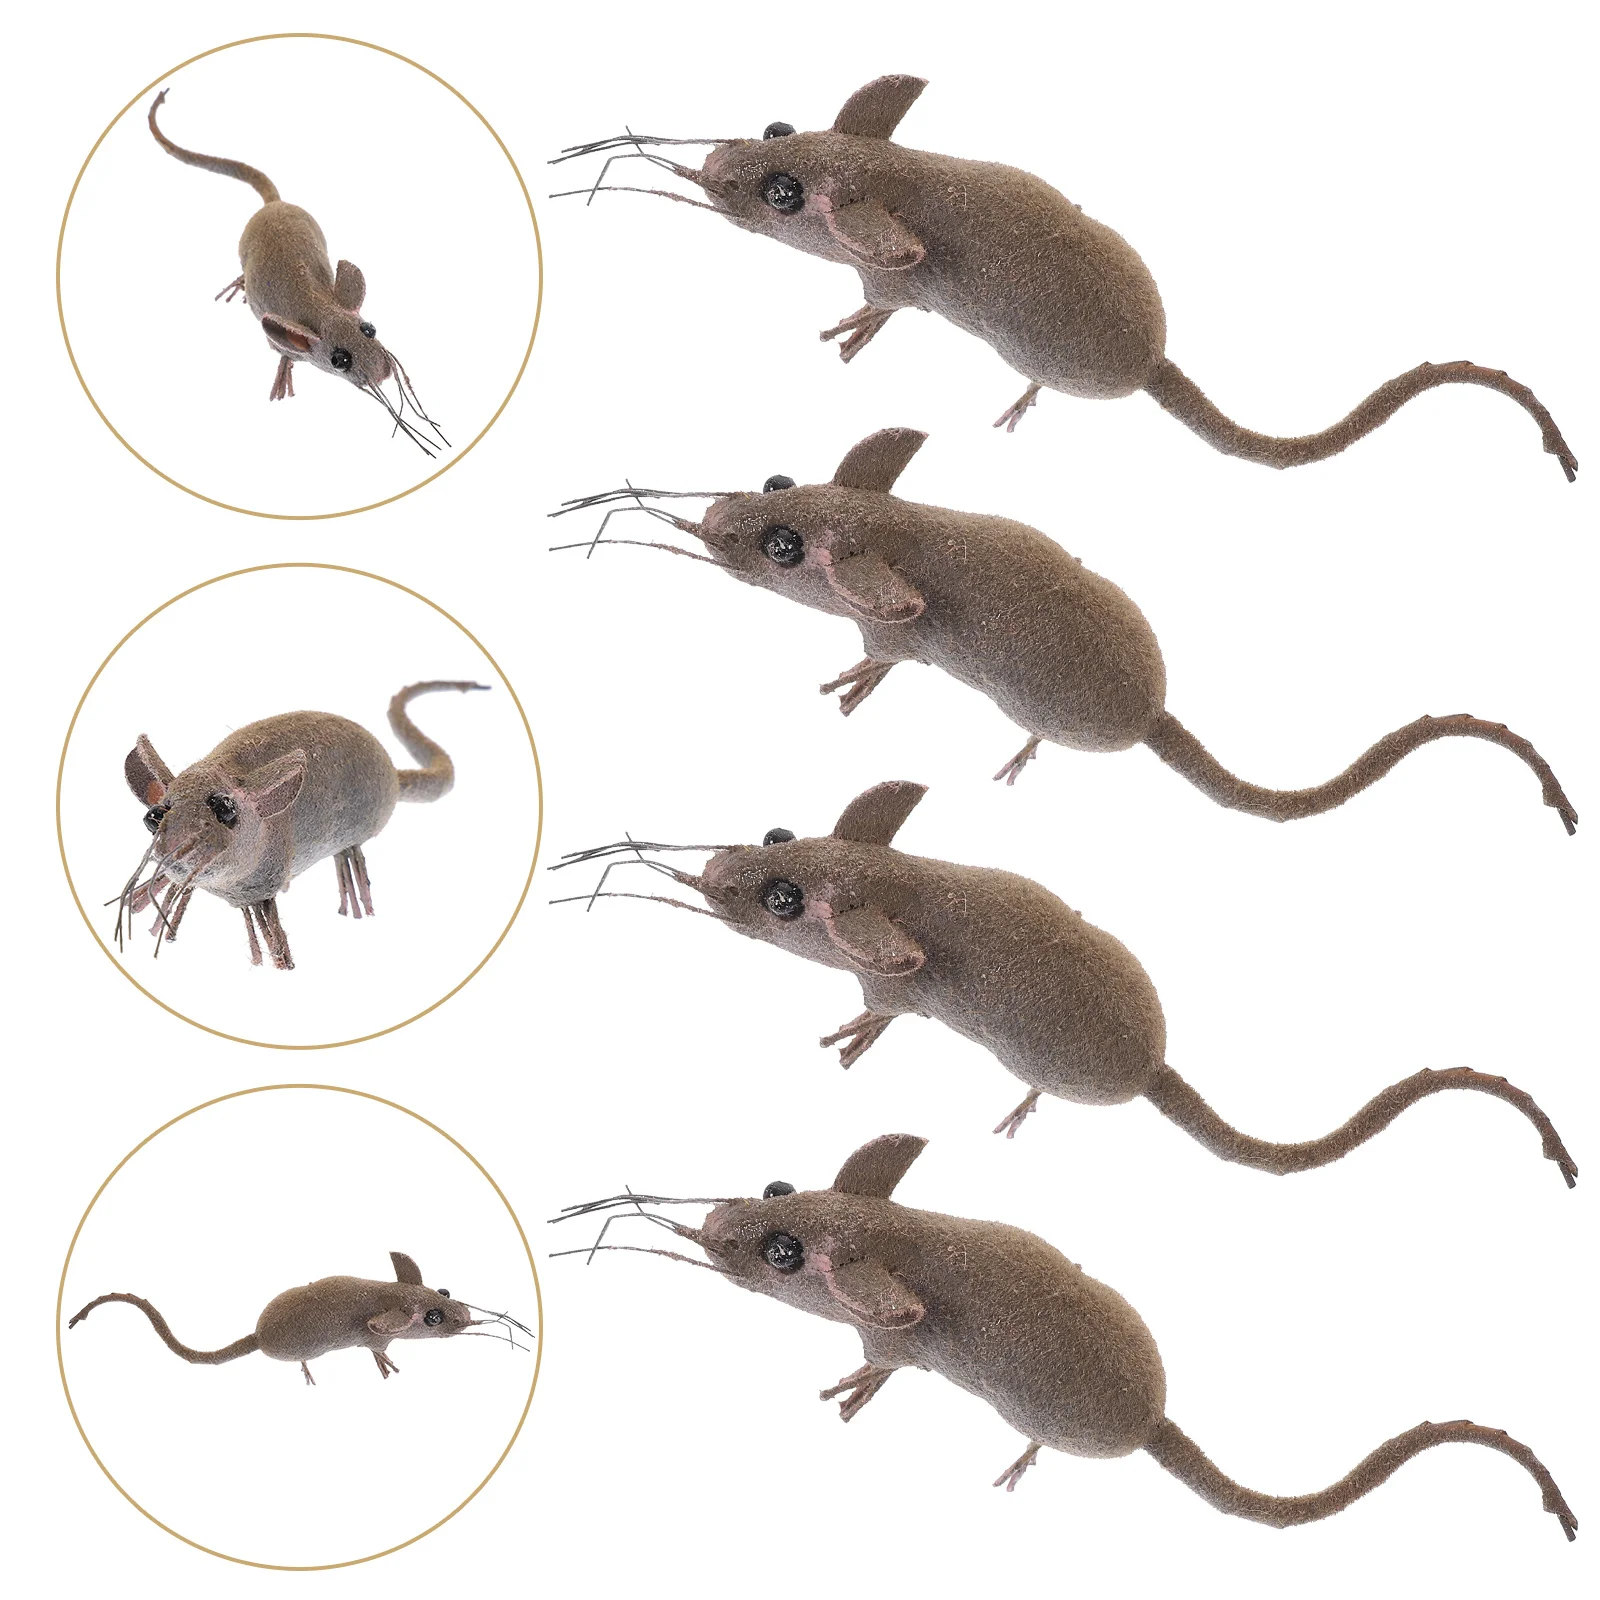 simulation pu fake sturgeon seafood food fish model baby toys model kitchen decoration props teaching materials teaching aids 4 Pcs High Simulation Mouse Micro-landscape Decoration Teaching Model 4pcs Home Fake Iron Wire Halloween Imitation Mice for